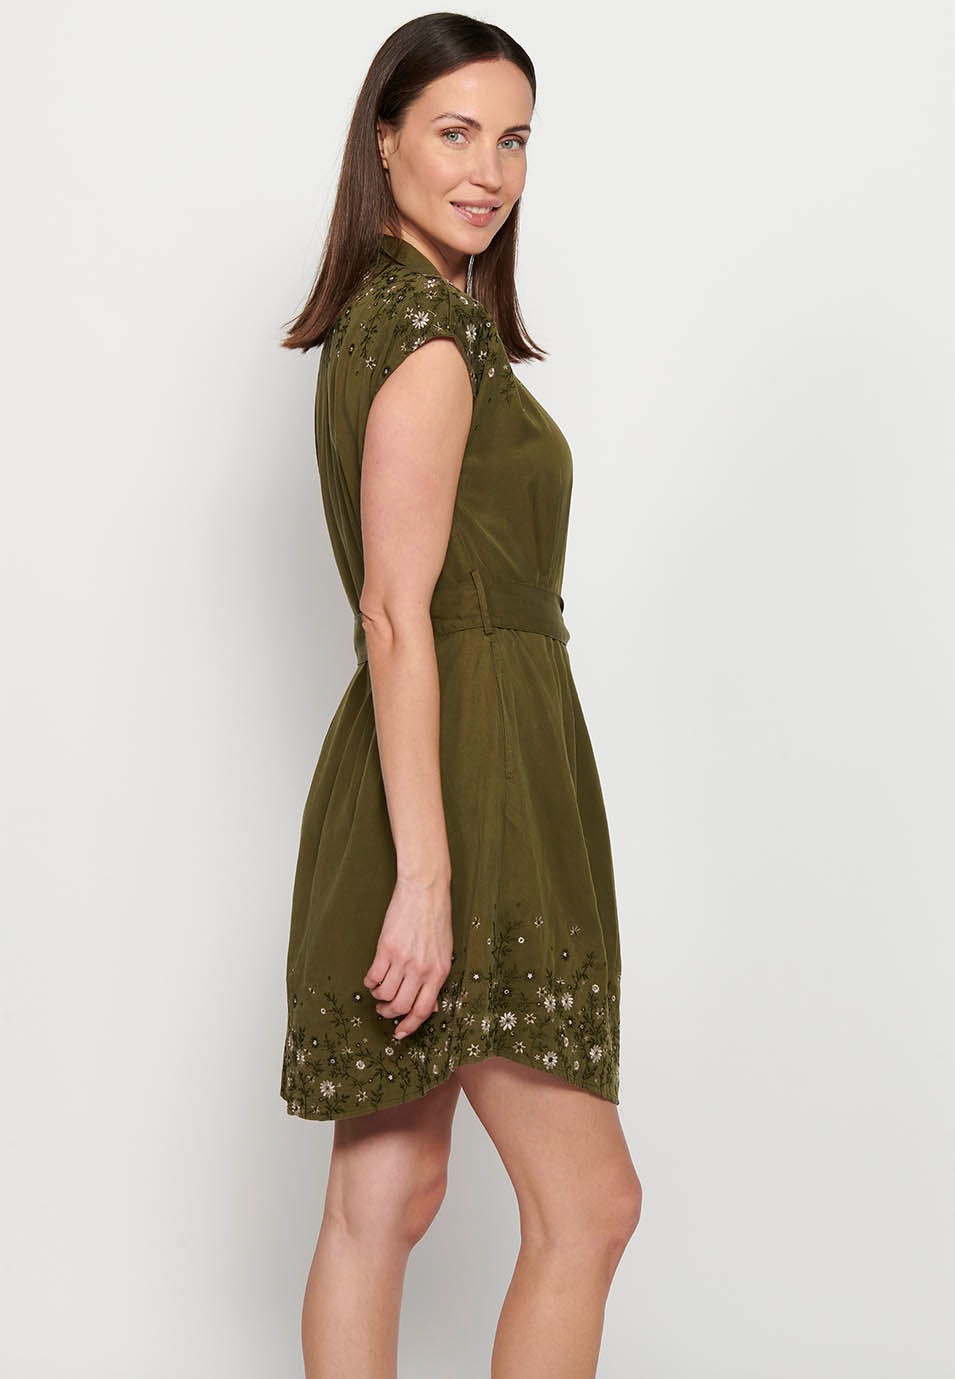 Short-sleeved midi dress with V-neckline and front button closure, fitted at the waist with embroidered details in Khaki color for Women 6